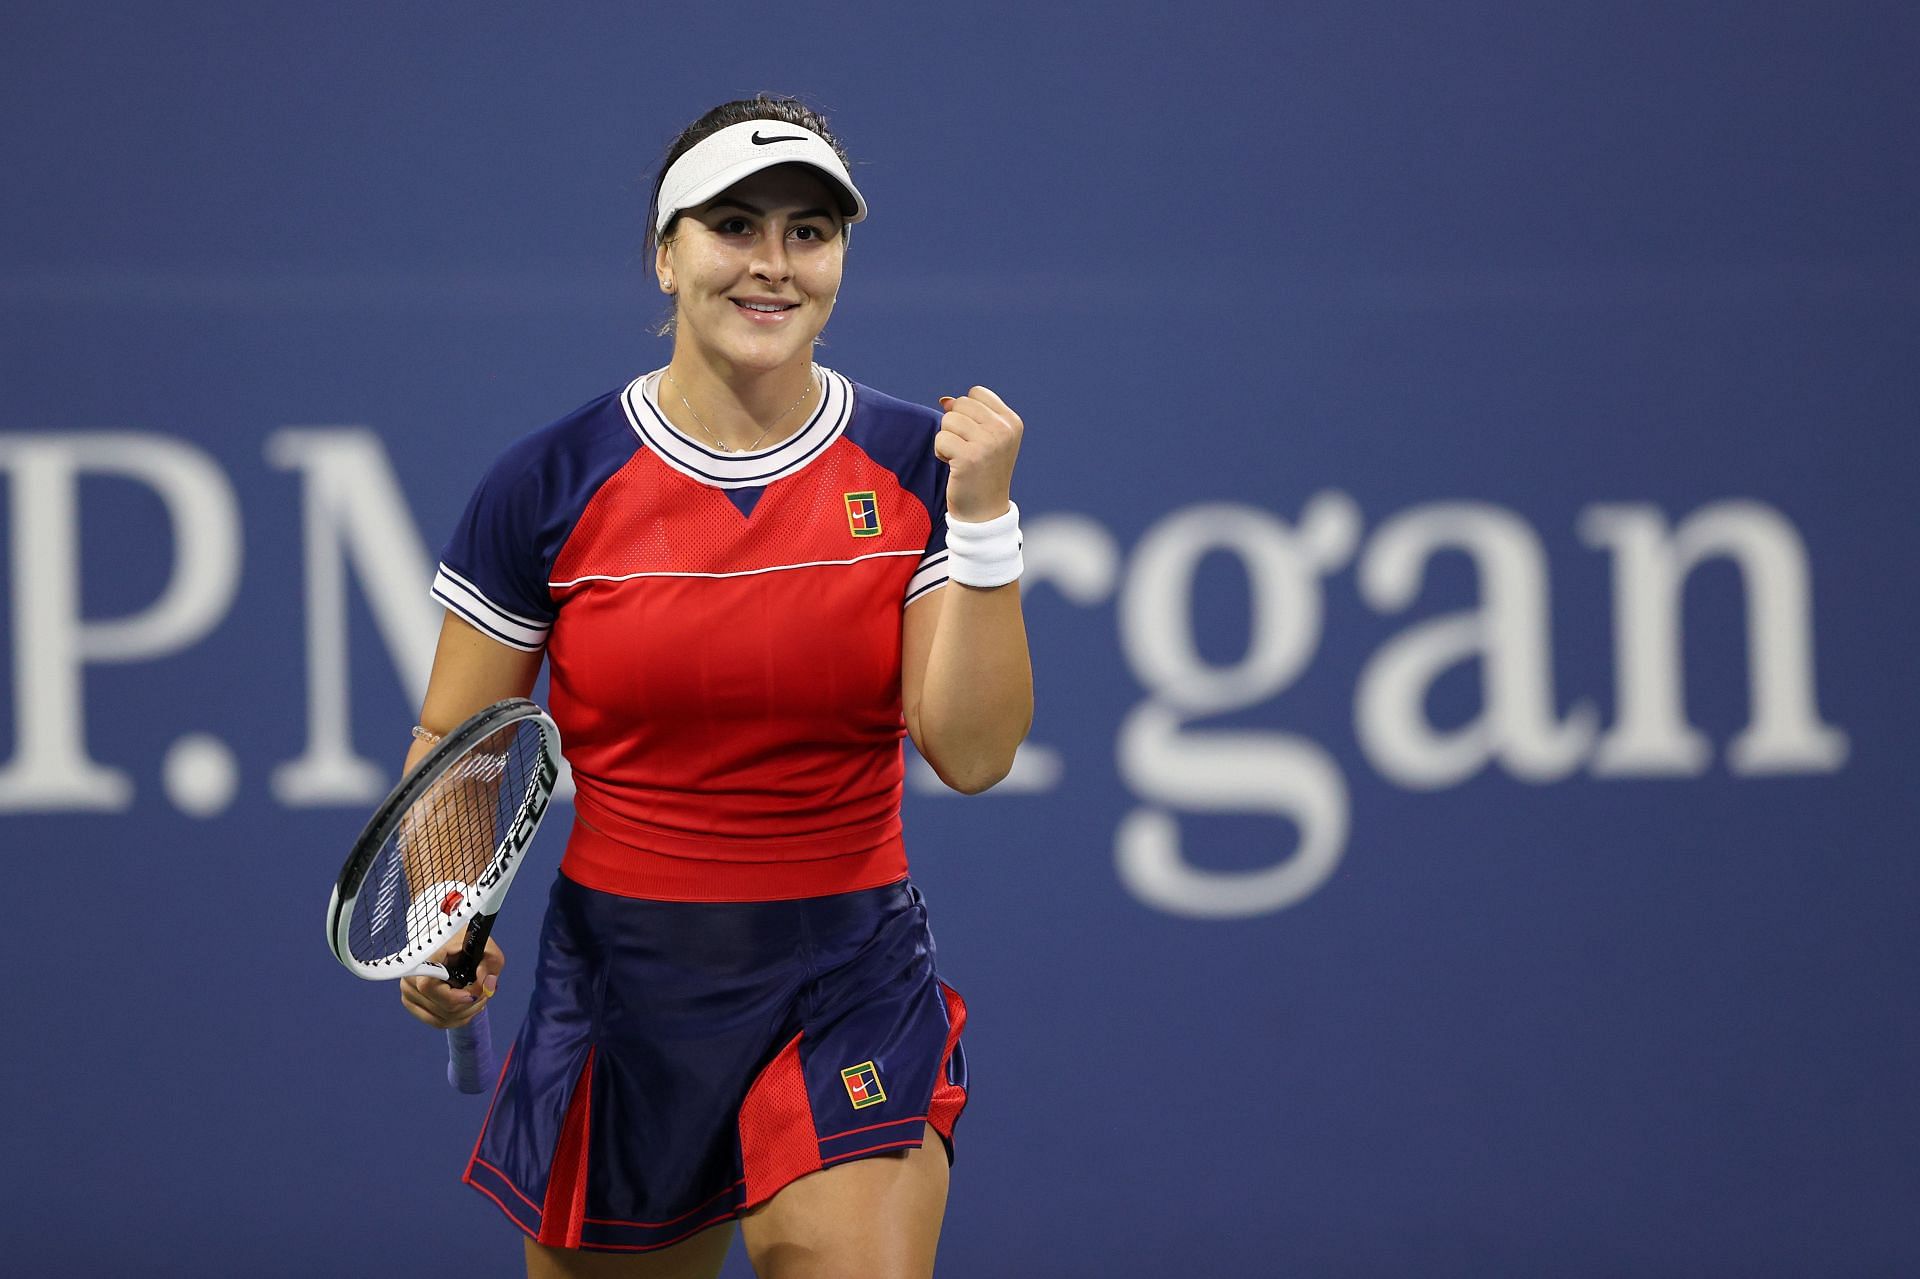 Bianca Andreescu at the 2021 US Open